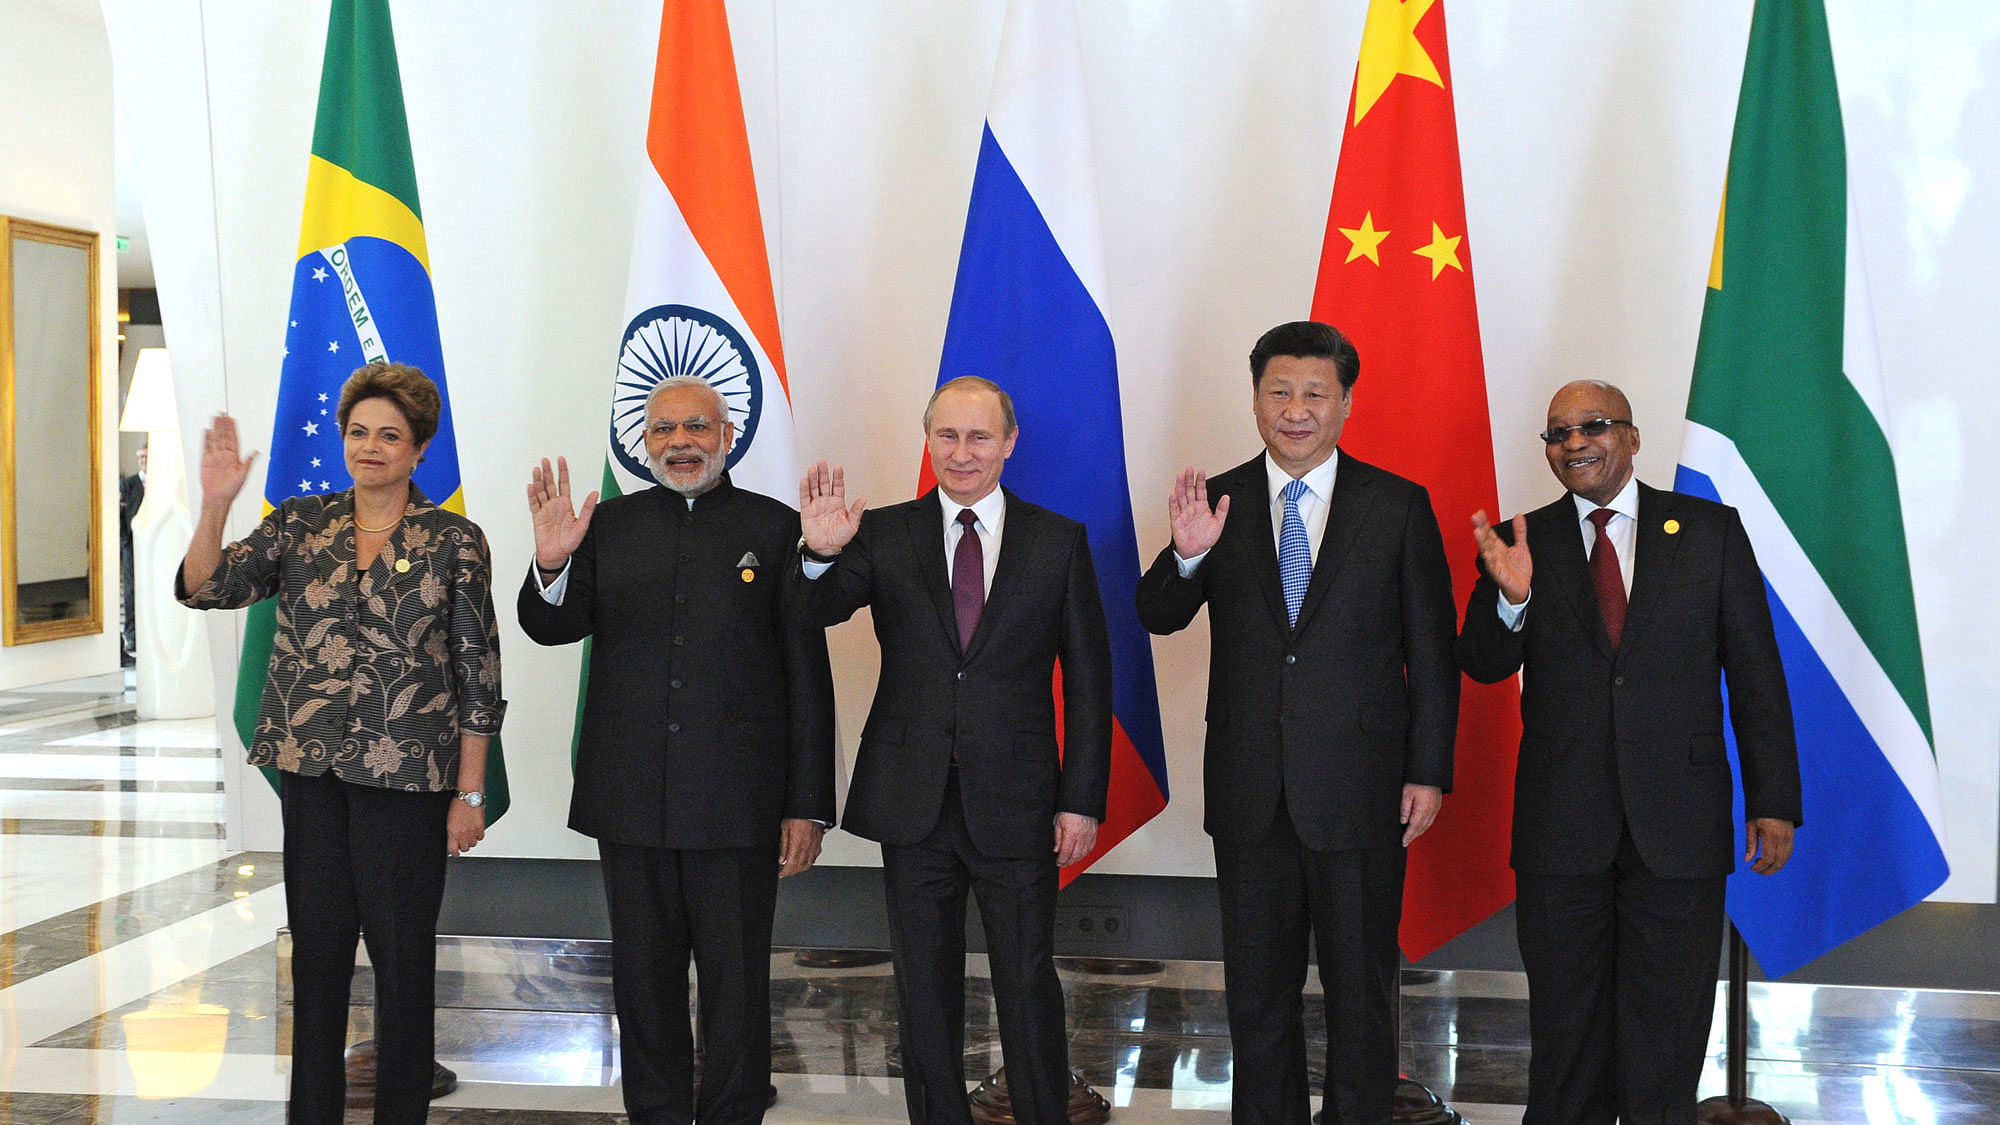 In a file photo, Narendra Modi (second from left) and other heads of state of BRICS countries. (Photo: Reuters)